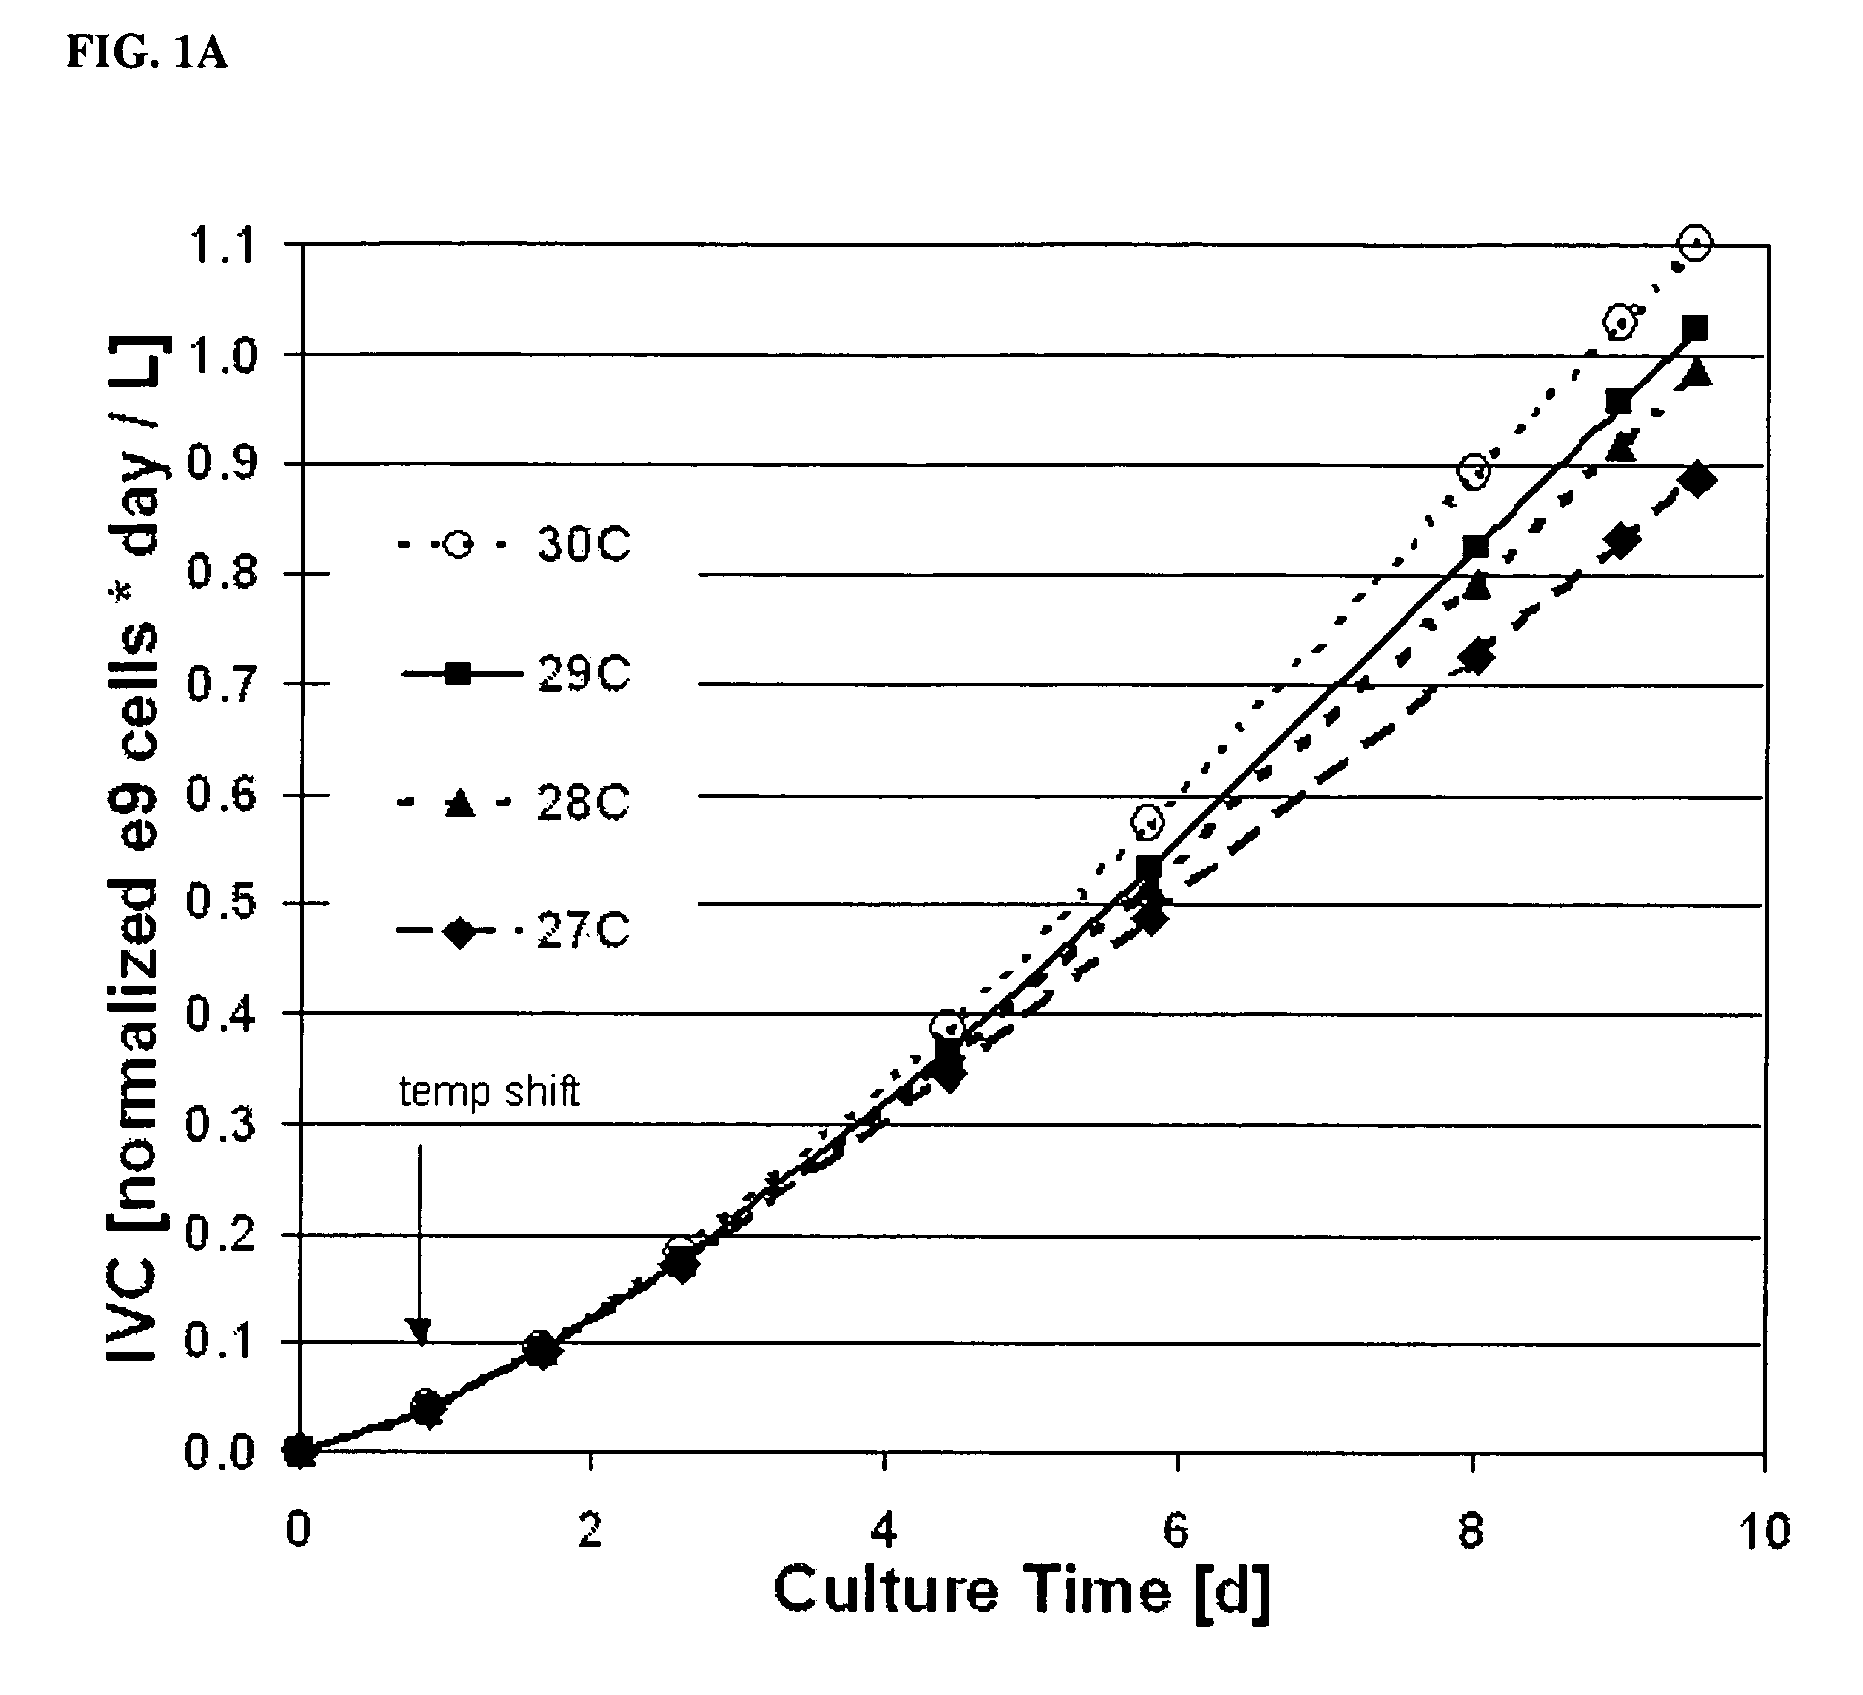 Use of low temperature and/or low ph in cell culture